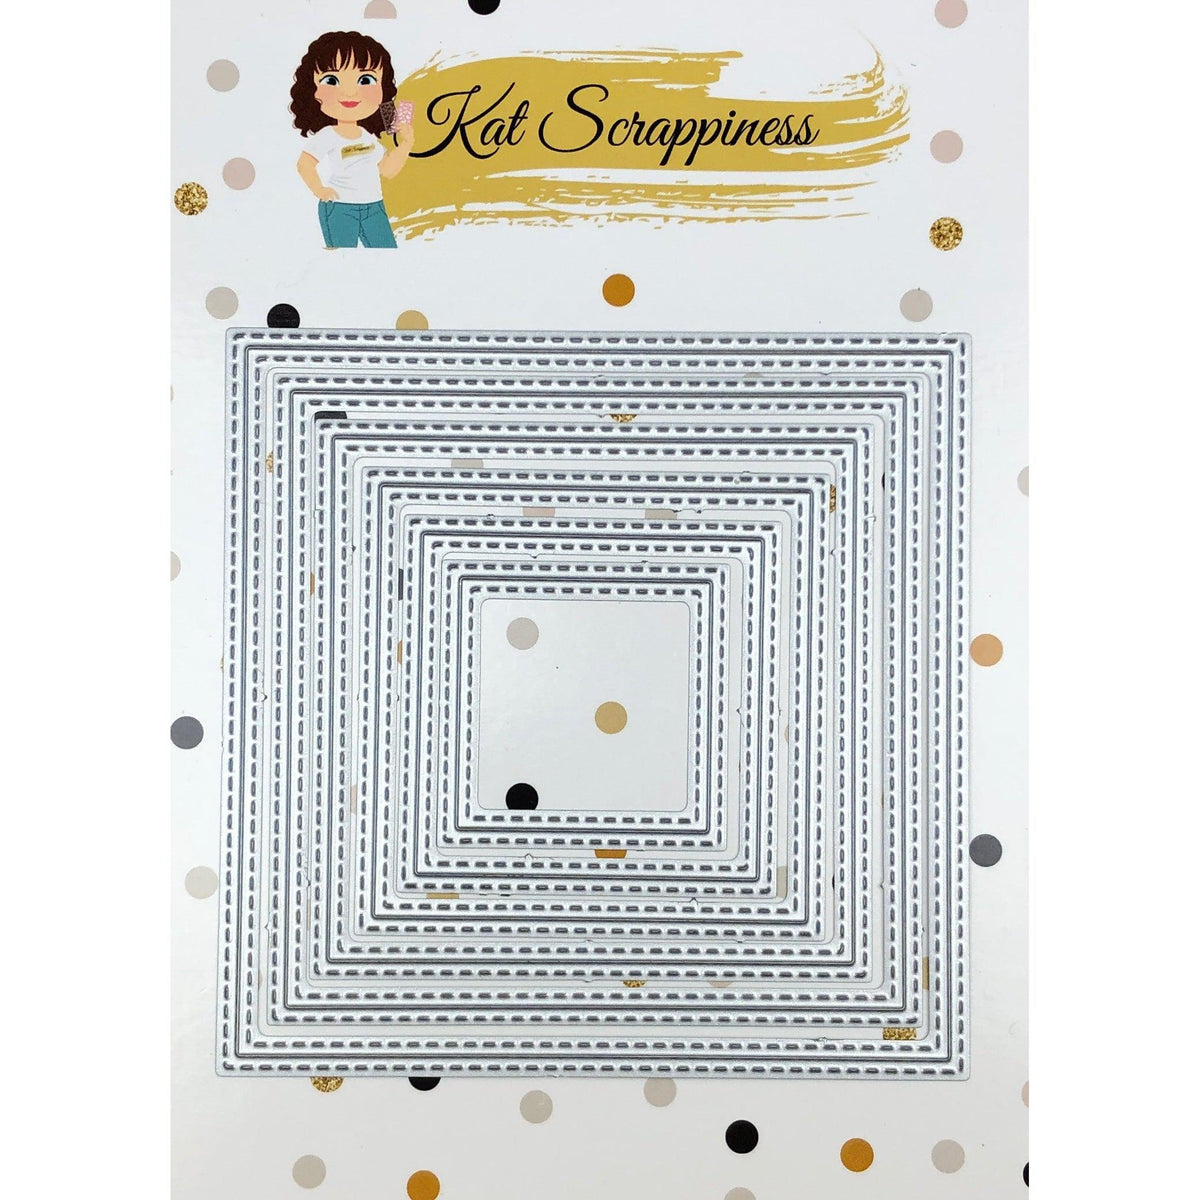 Double Stitched Square Dies by Kat Scrappiness - Kat Scrappiness